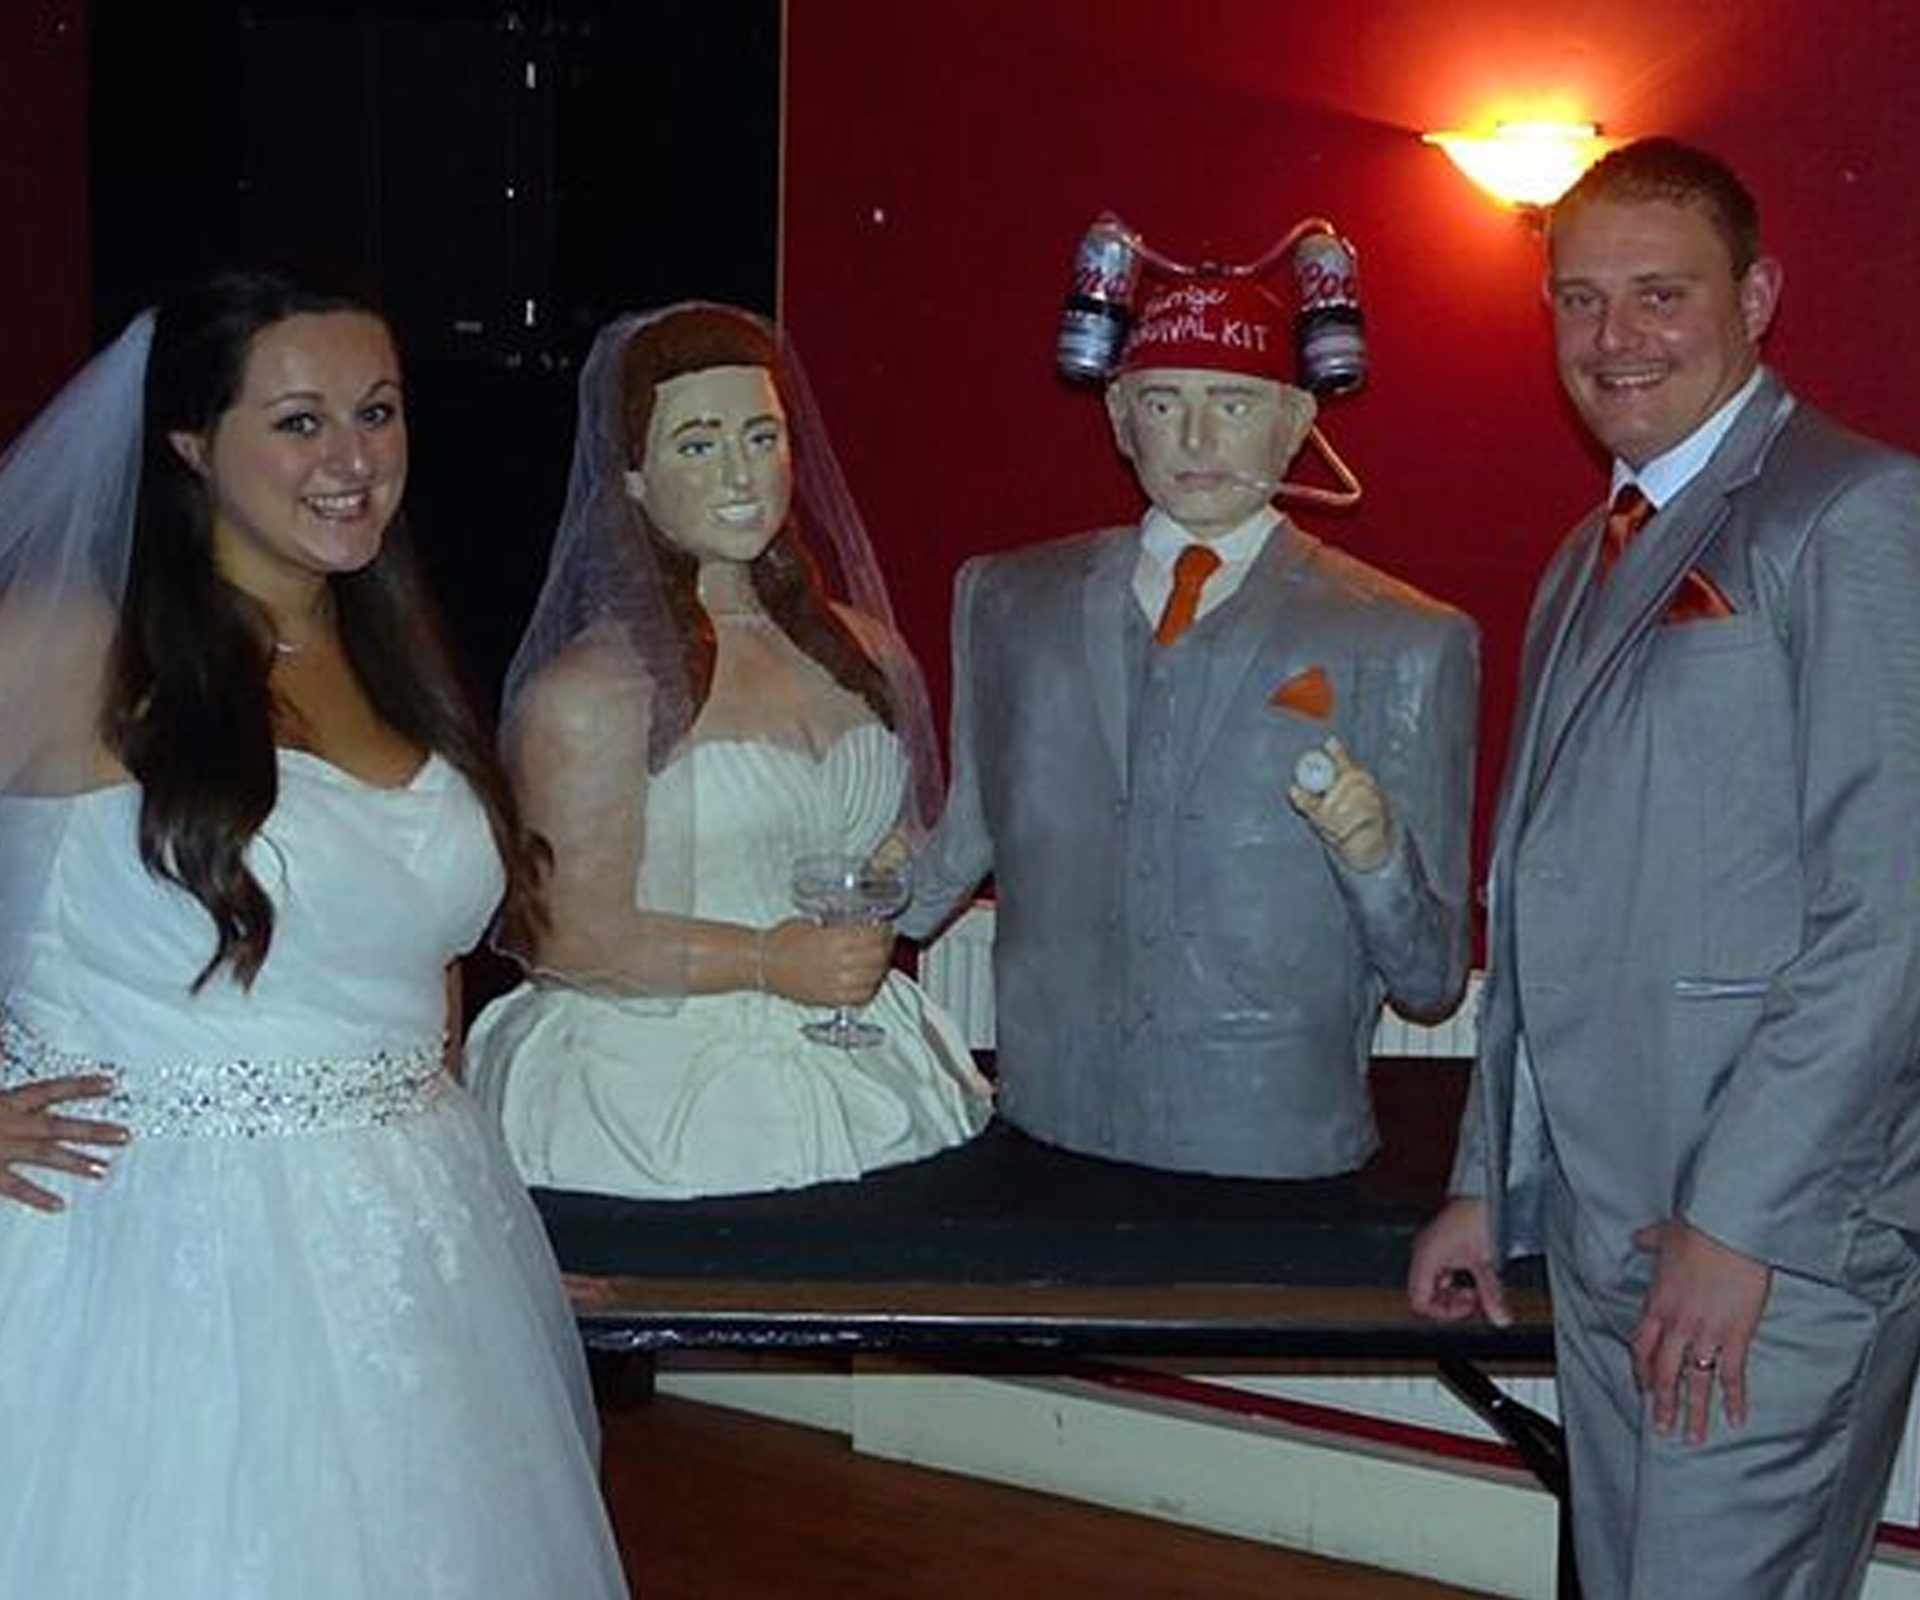 This wedding takes the cake! Woman recreates lifesized cakes of bride and groom